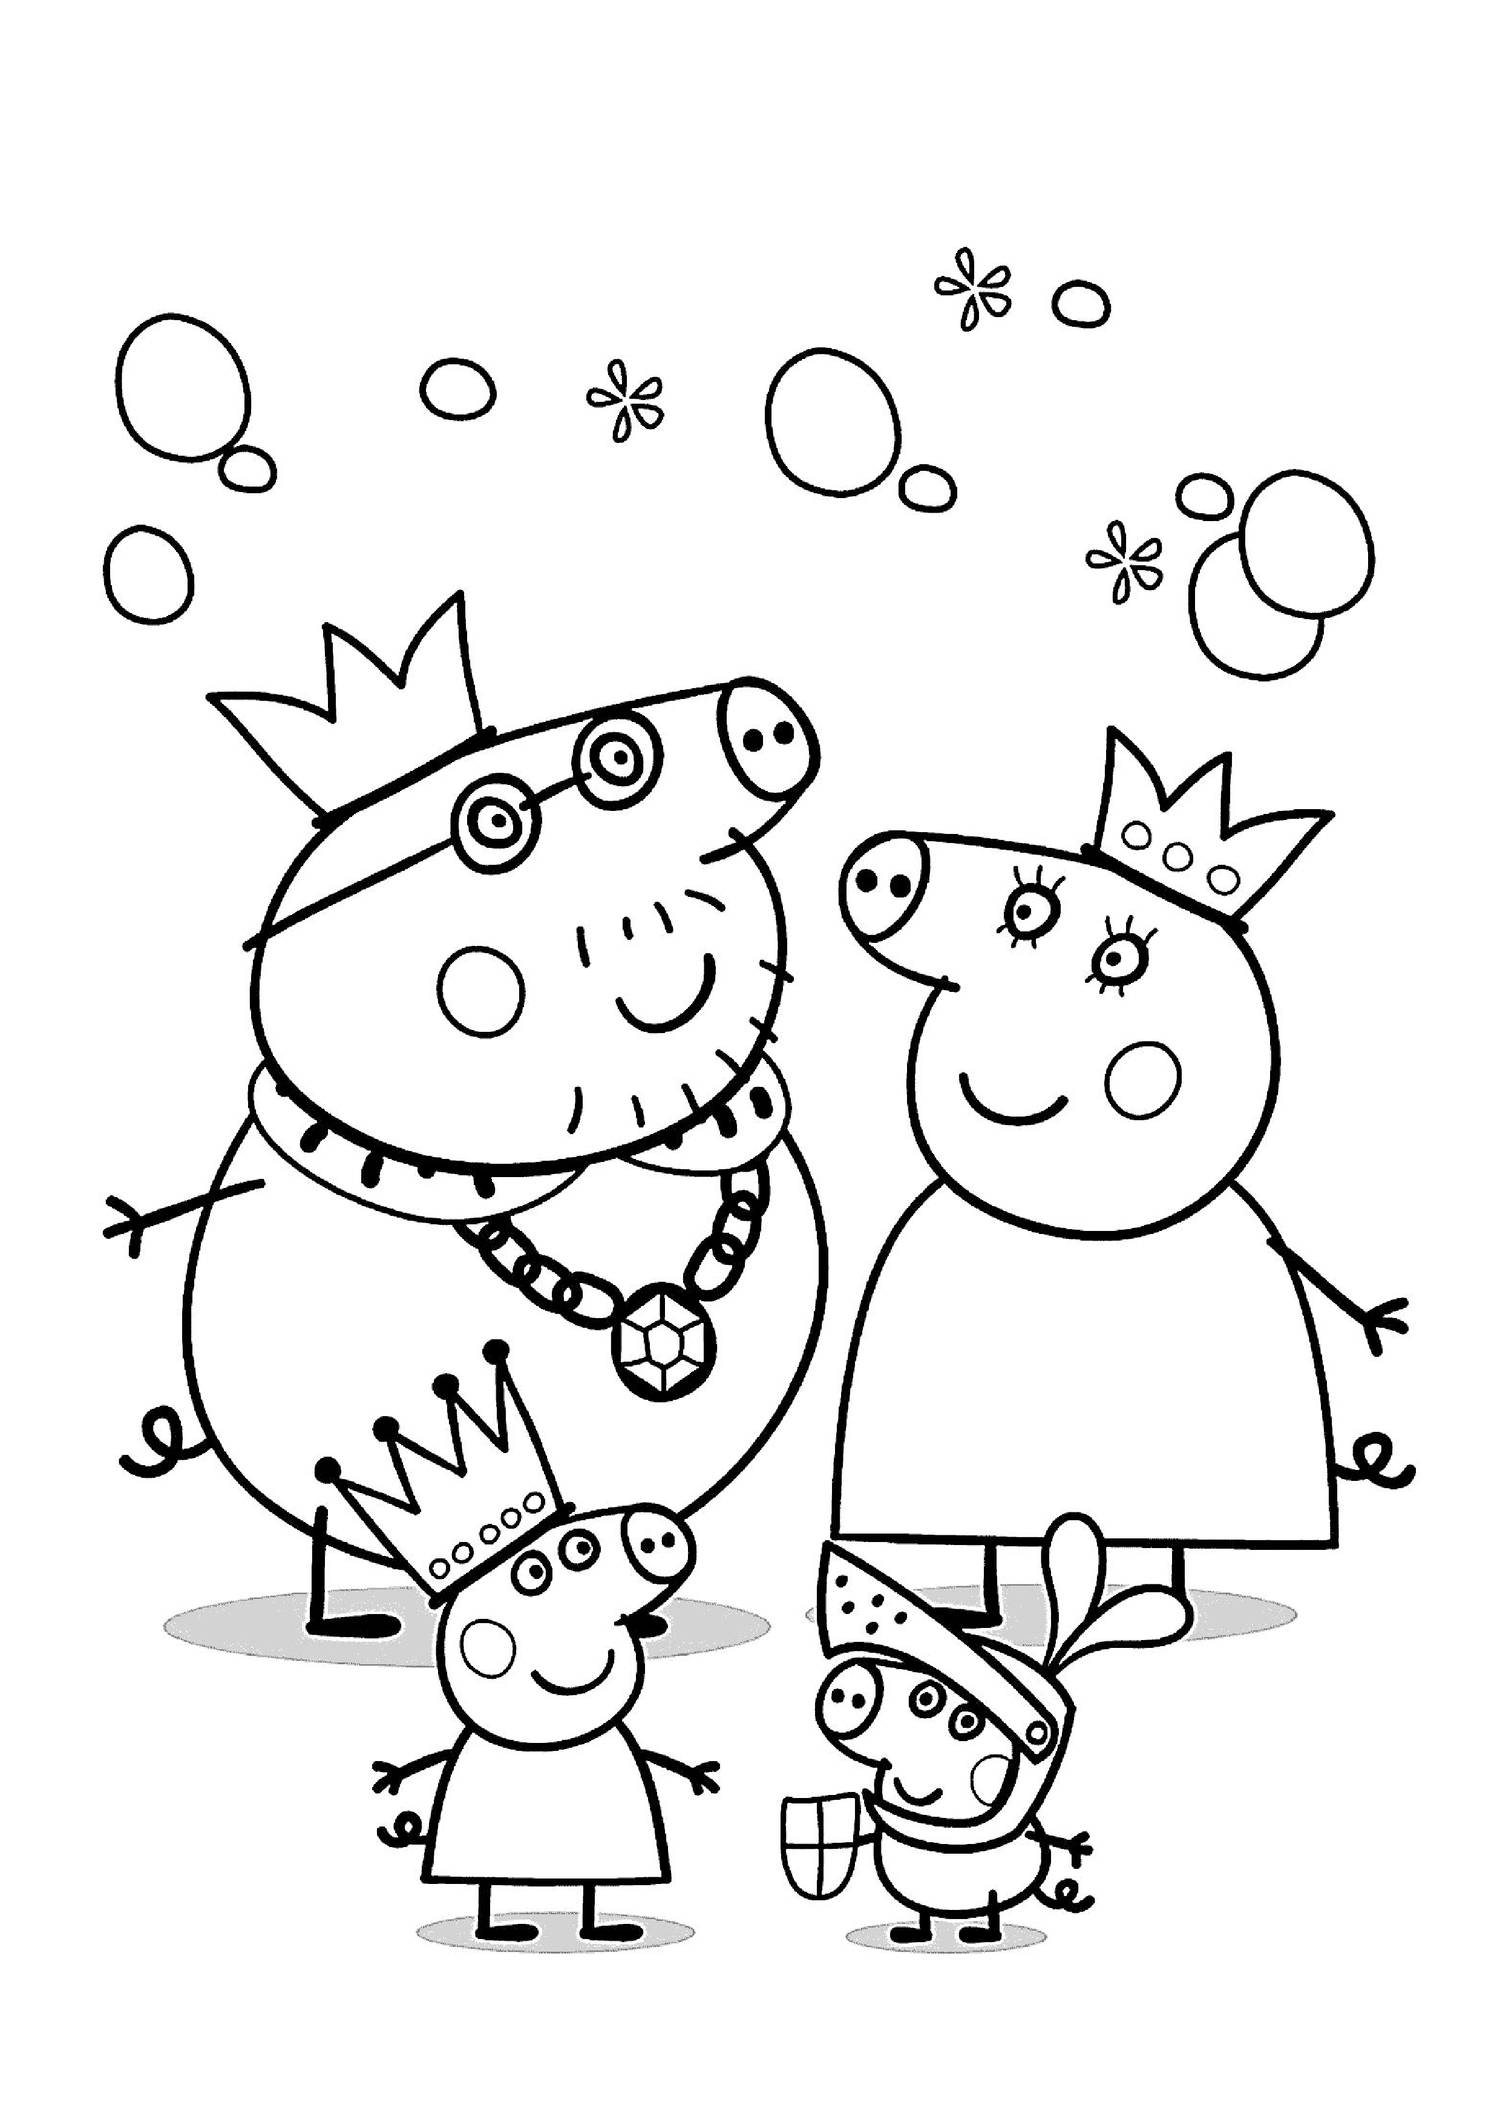 Coloring Pages : Coloring Games For Adults Kids Free Printable